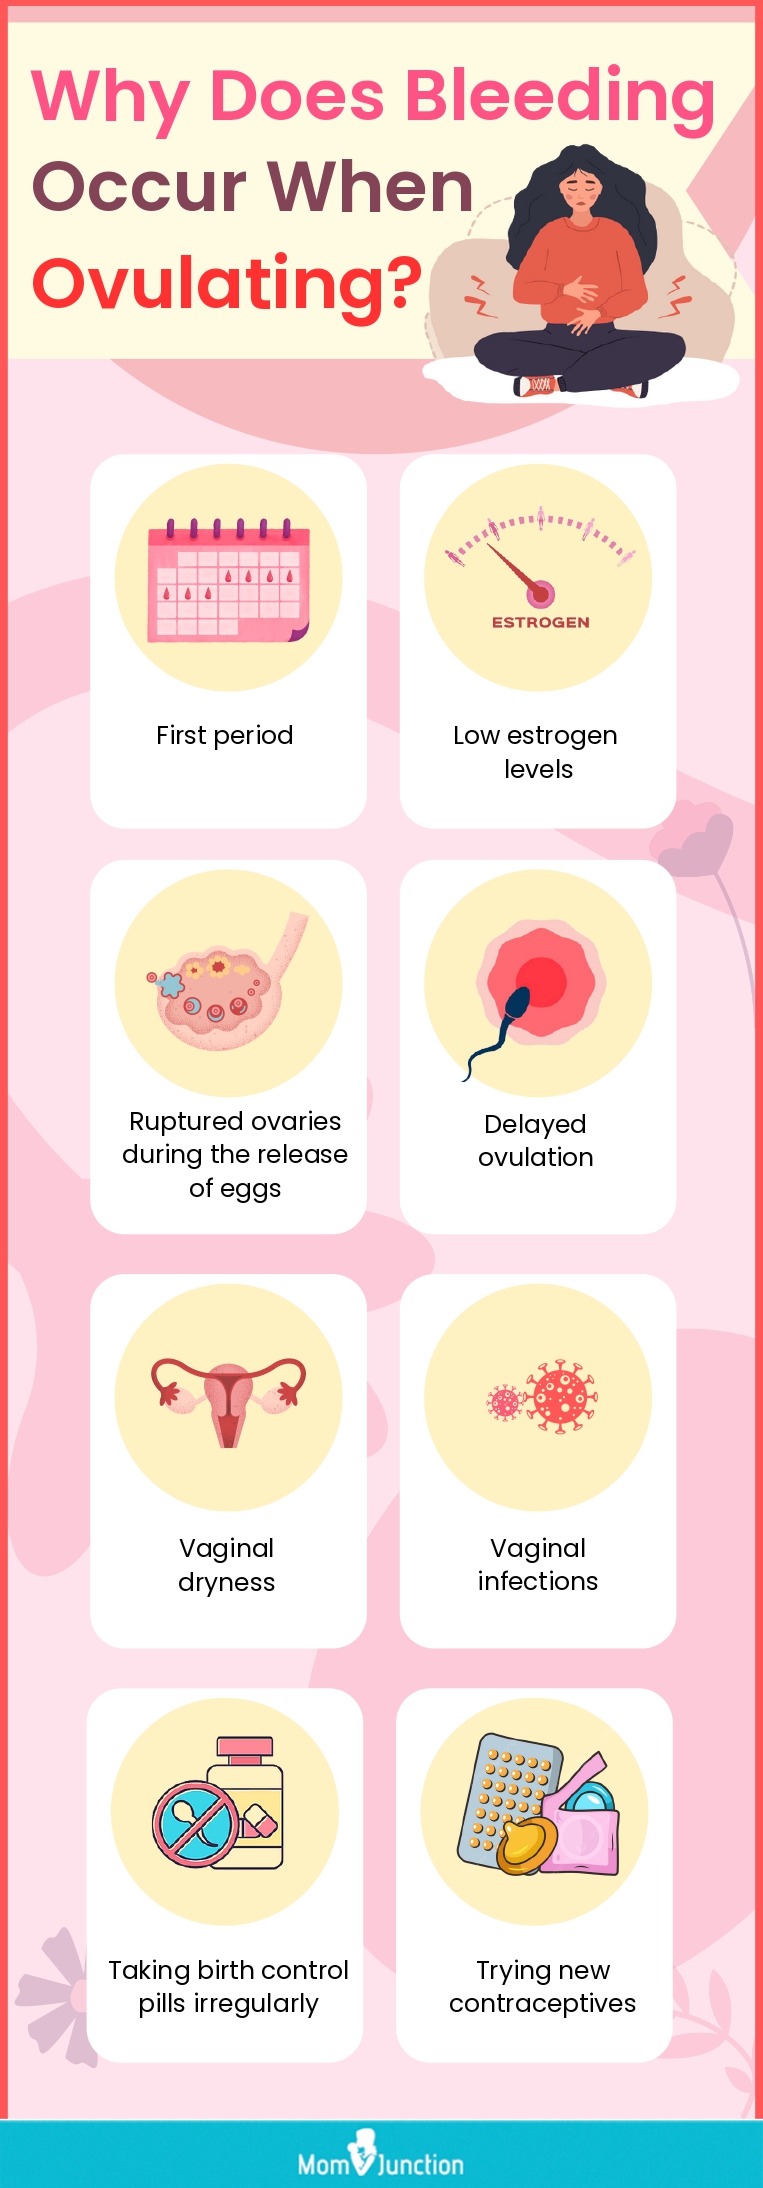 https://www.momjunction.com/wp-content/uploads/2023/05/Infographic-Low-Risk-Reasons-Behind-Occurrence-Of-Bleeding-During-Ovulation.jpg